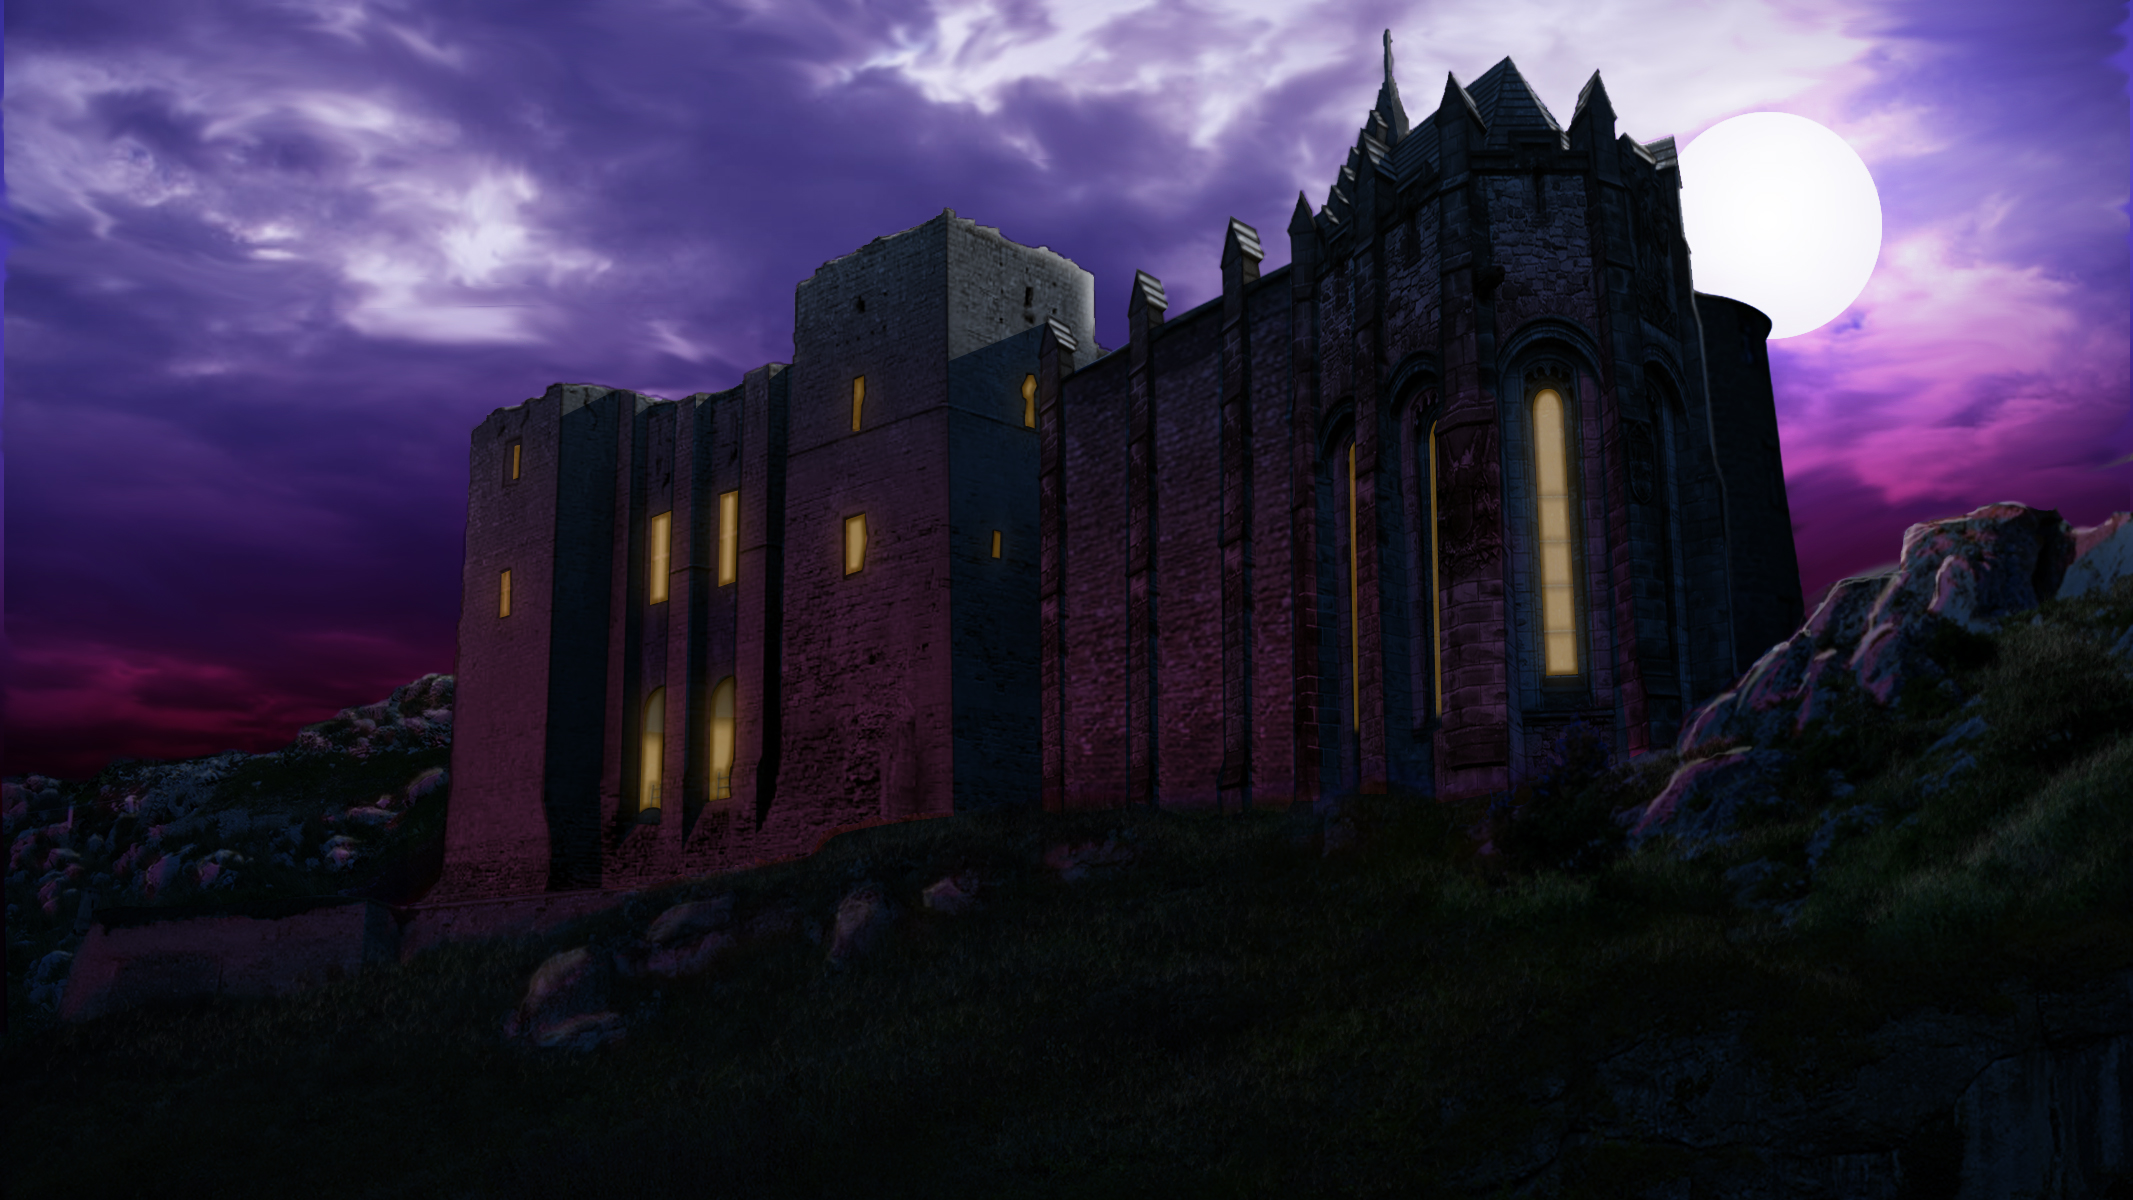 Concept art of Lord Bateman's castle from the film of the same name.